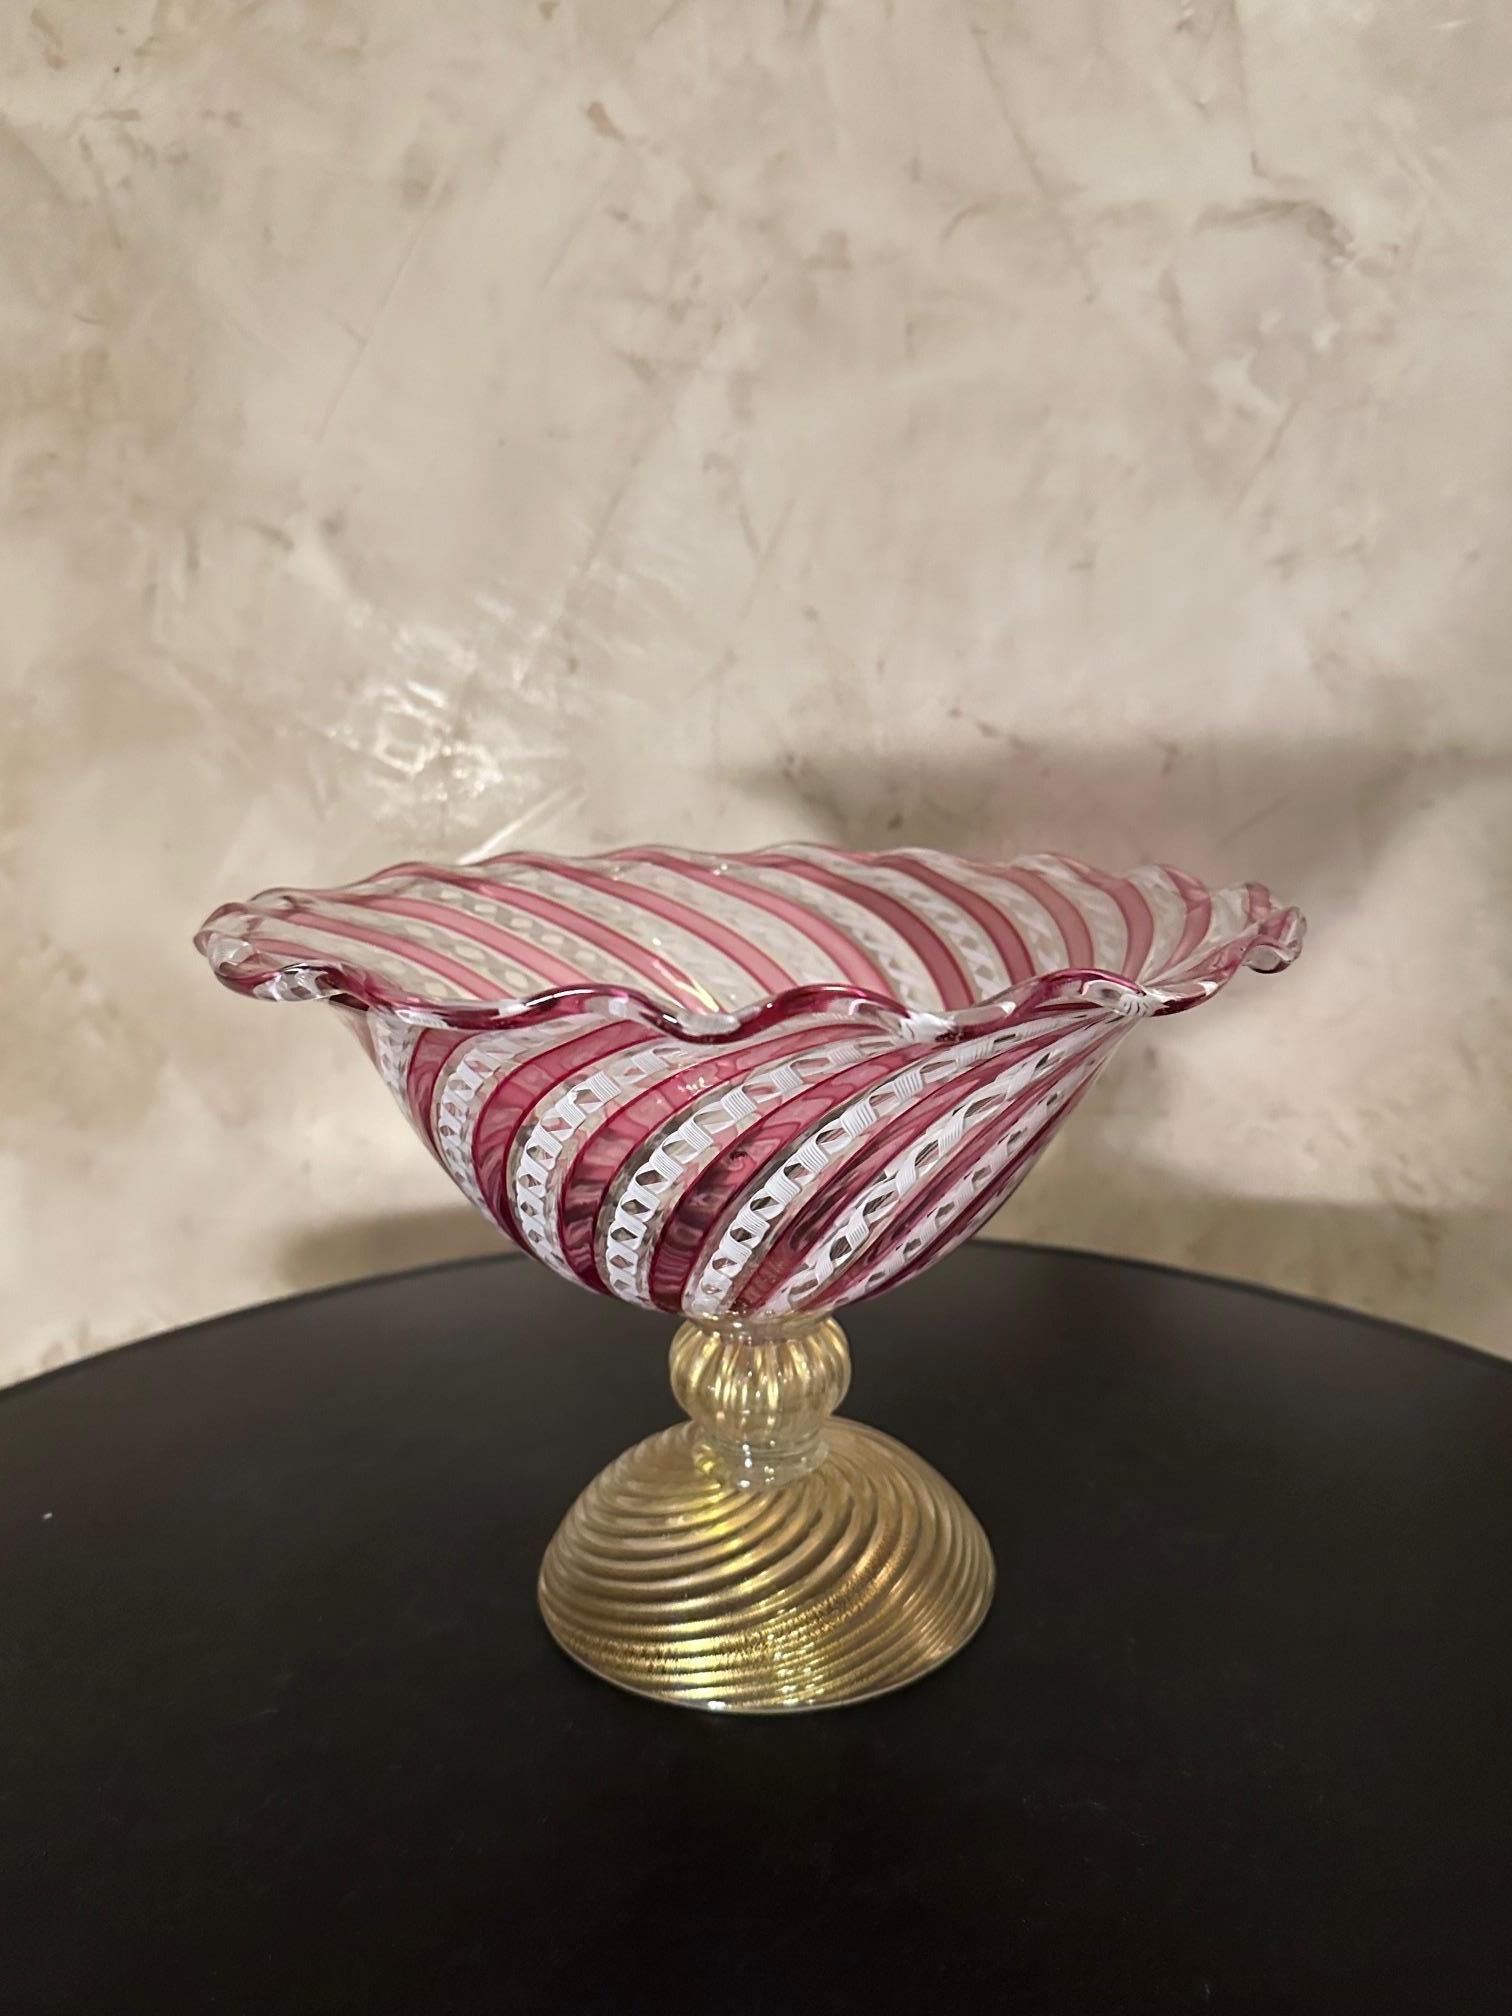 Murano blown glass bowl with 1950s pattern with white and red twists on translucent glass. Twisted ring base decorated with gold sequins. Designer 